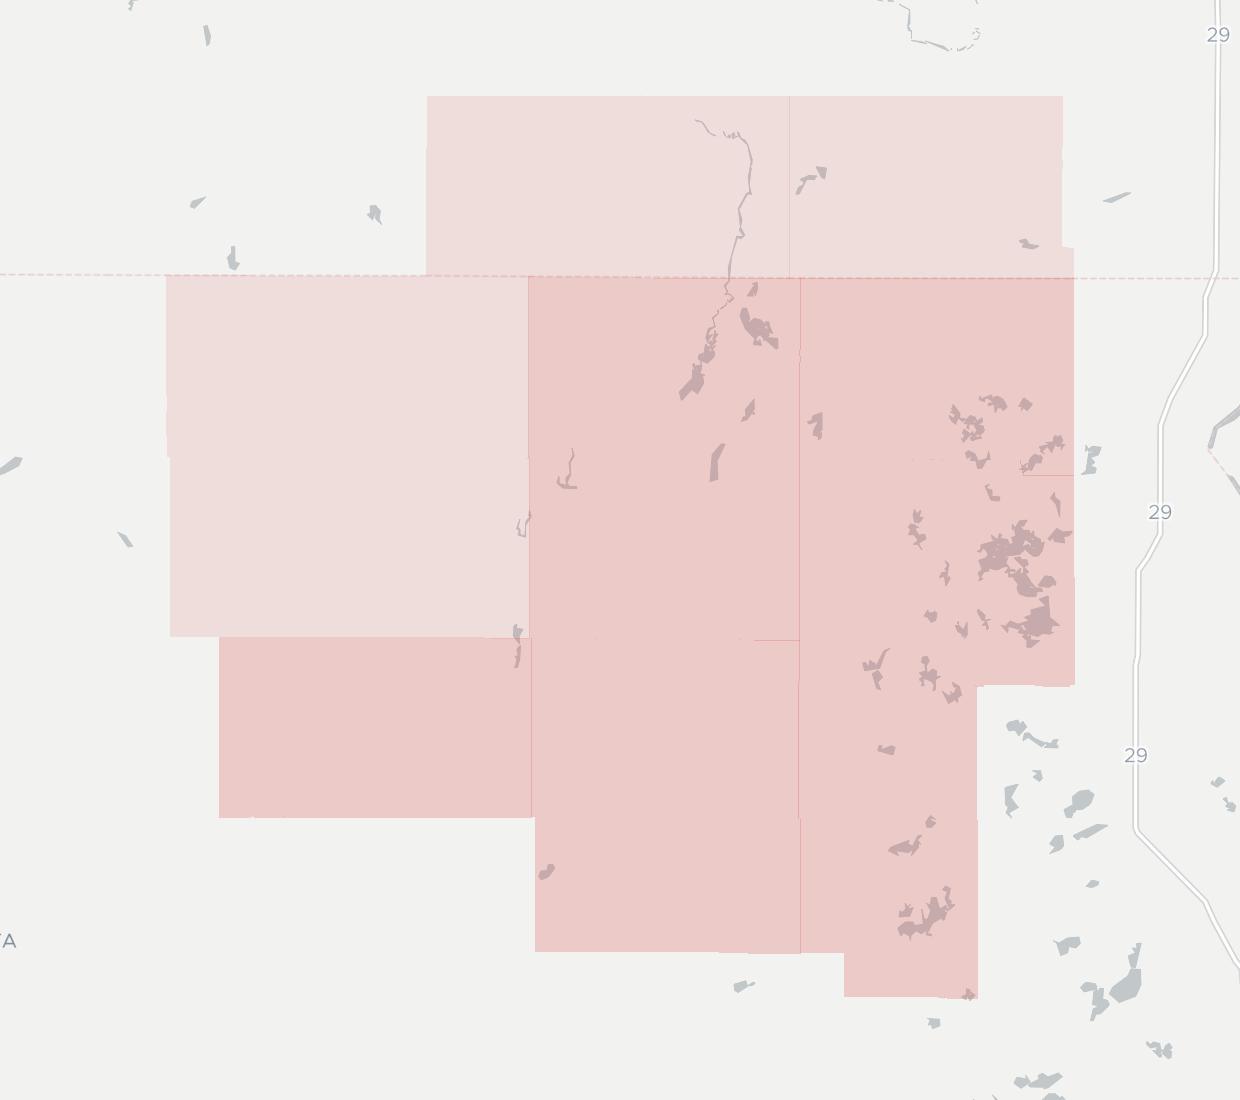 James Valley Telecommunications Coverage Map